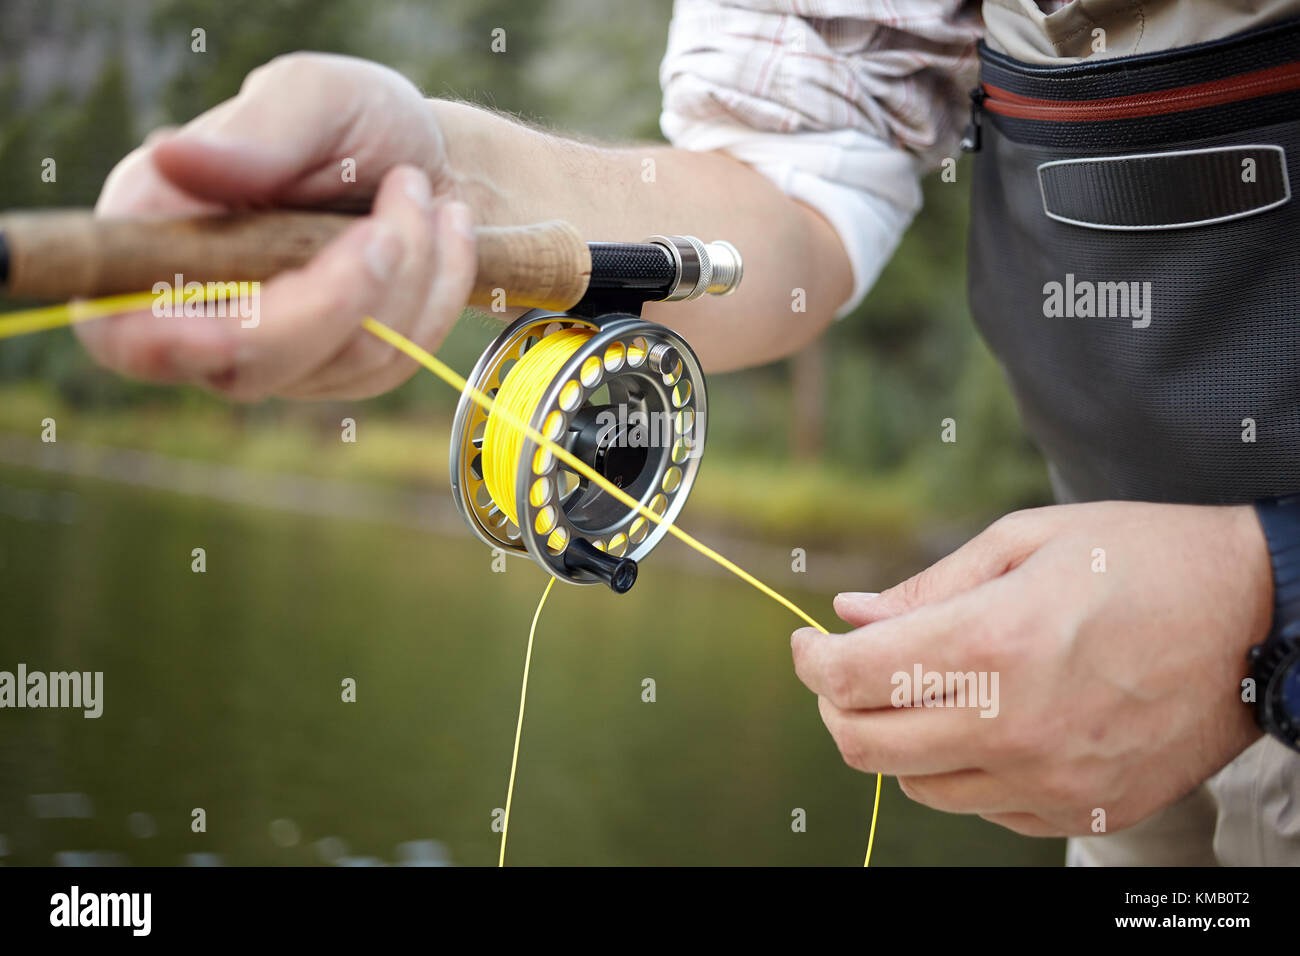 Fly fisherman using a spinning reel with yellow line in a close up view on  his hands against water with green reflections Stock Photo - Alamy